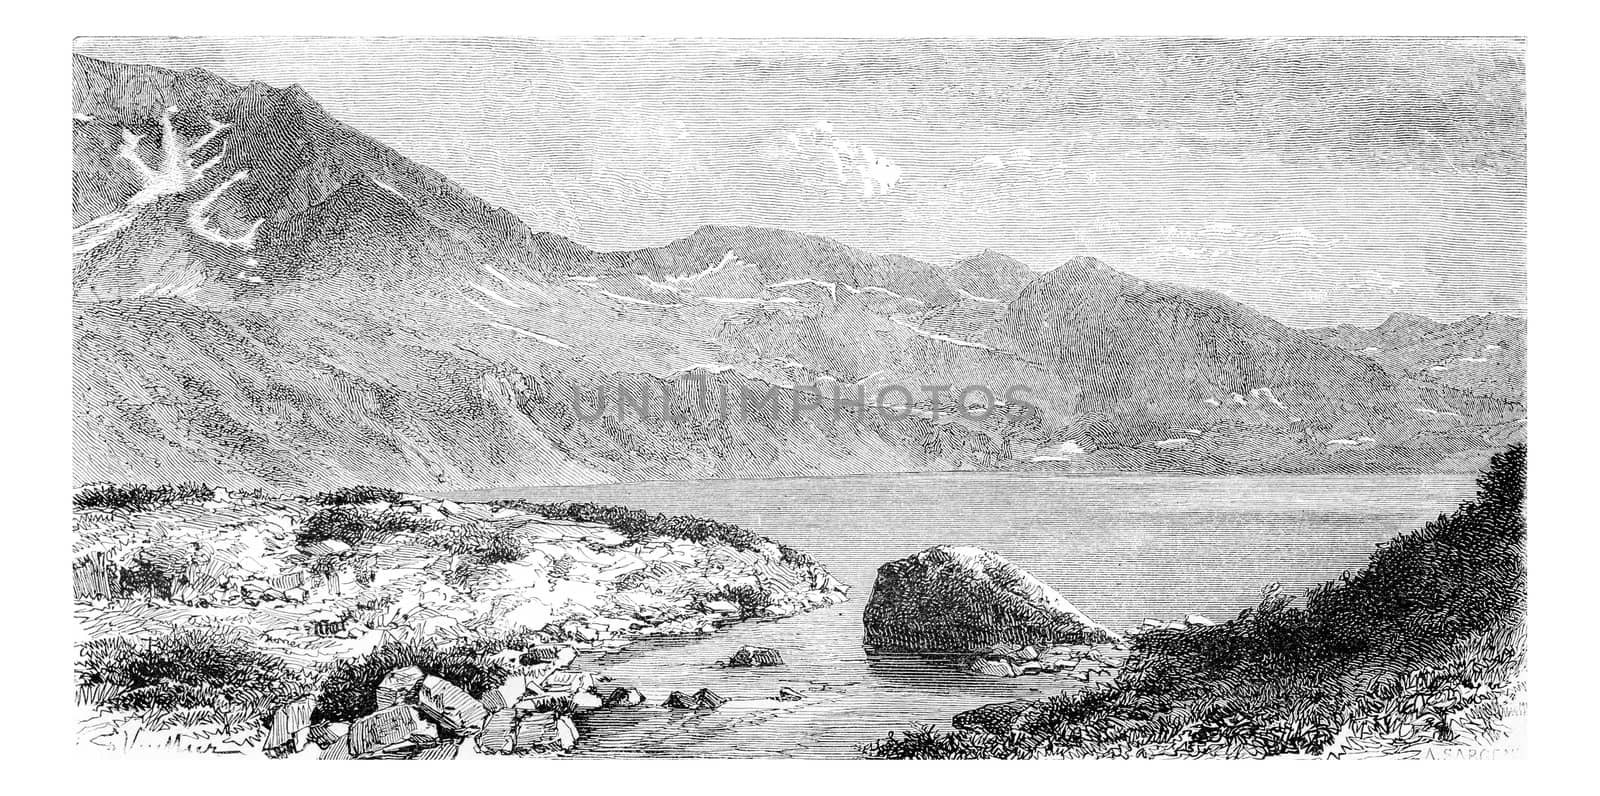 Lake Wielki Staw in the Valley of the Five Lakes, in Krkonose Mountains, Poland, drawing by G. Vuillier from a photograph, vintage engraved illustration. Le Tour du Monde, Travel Journal, 1881